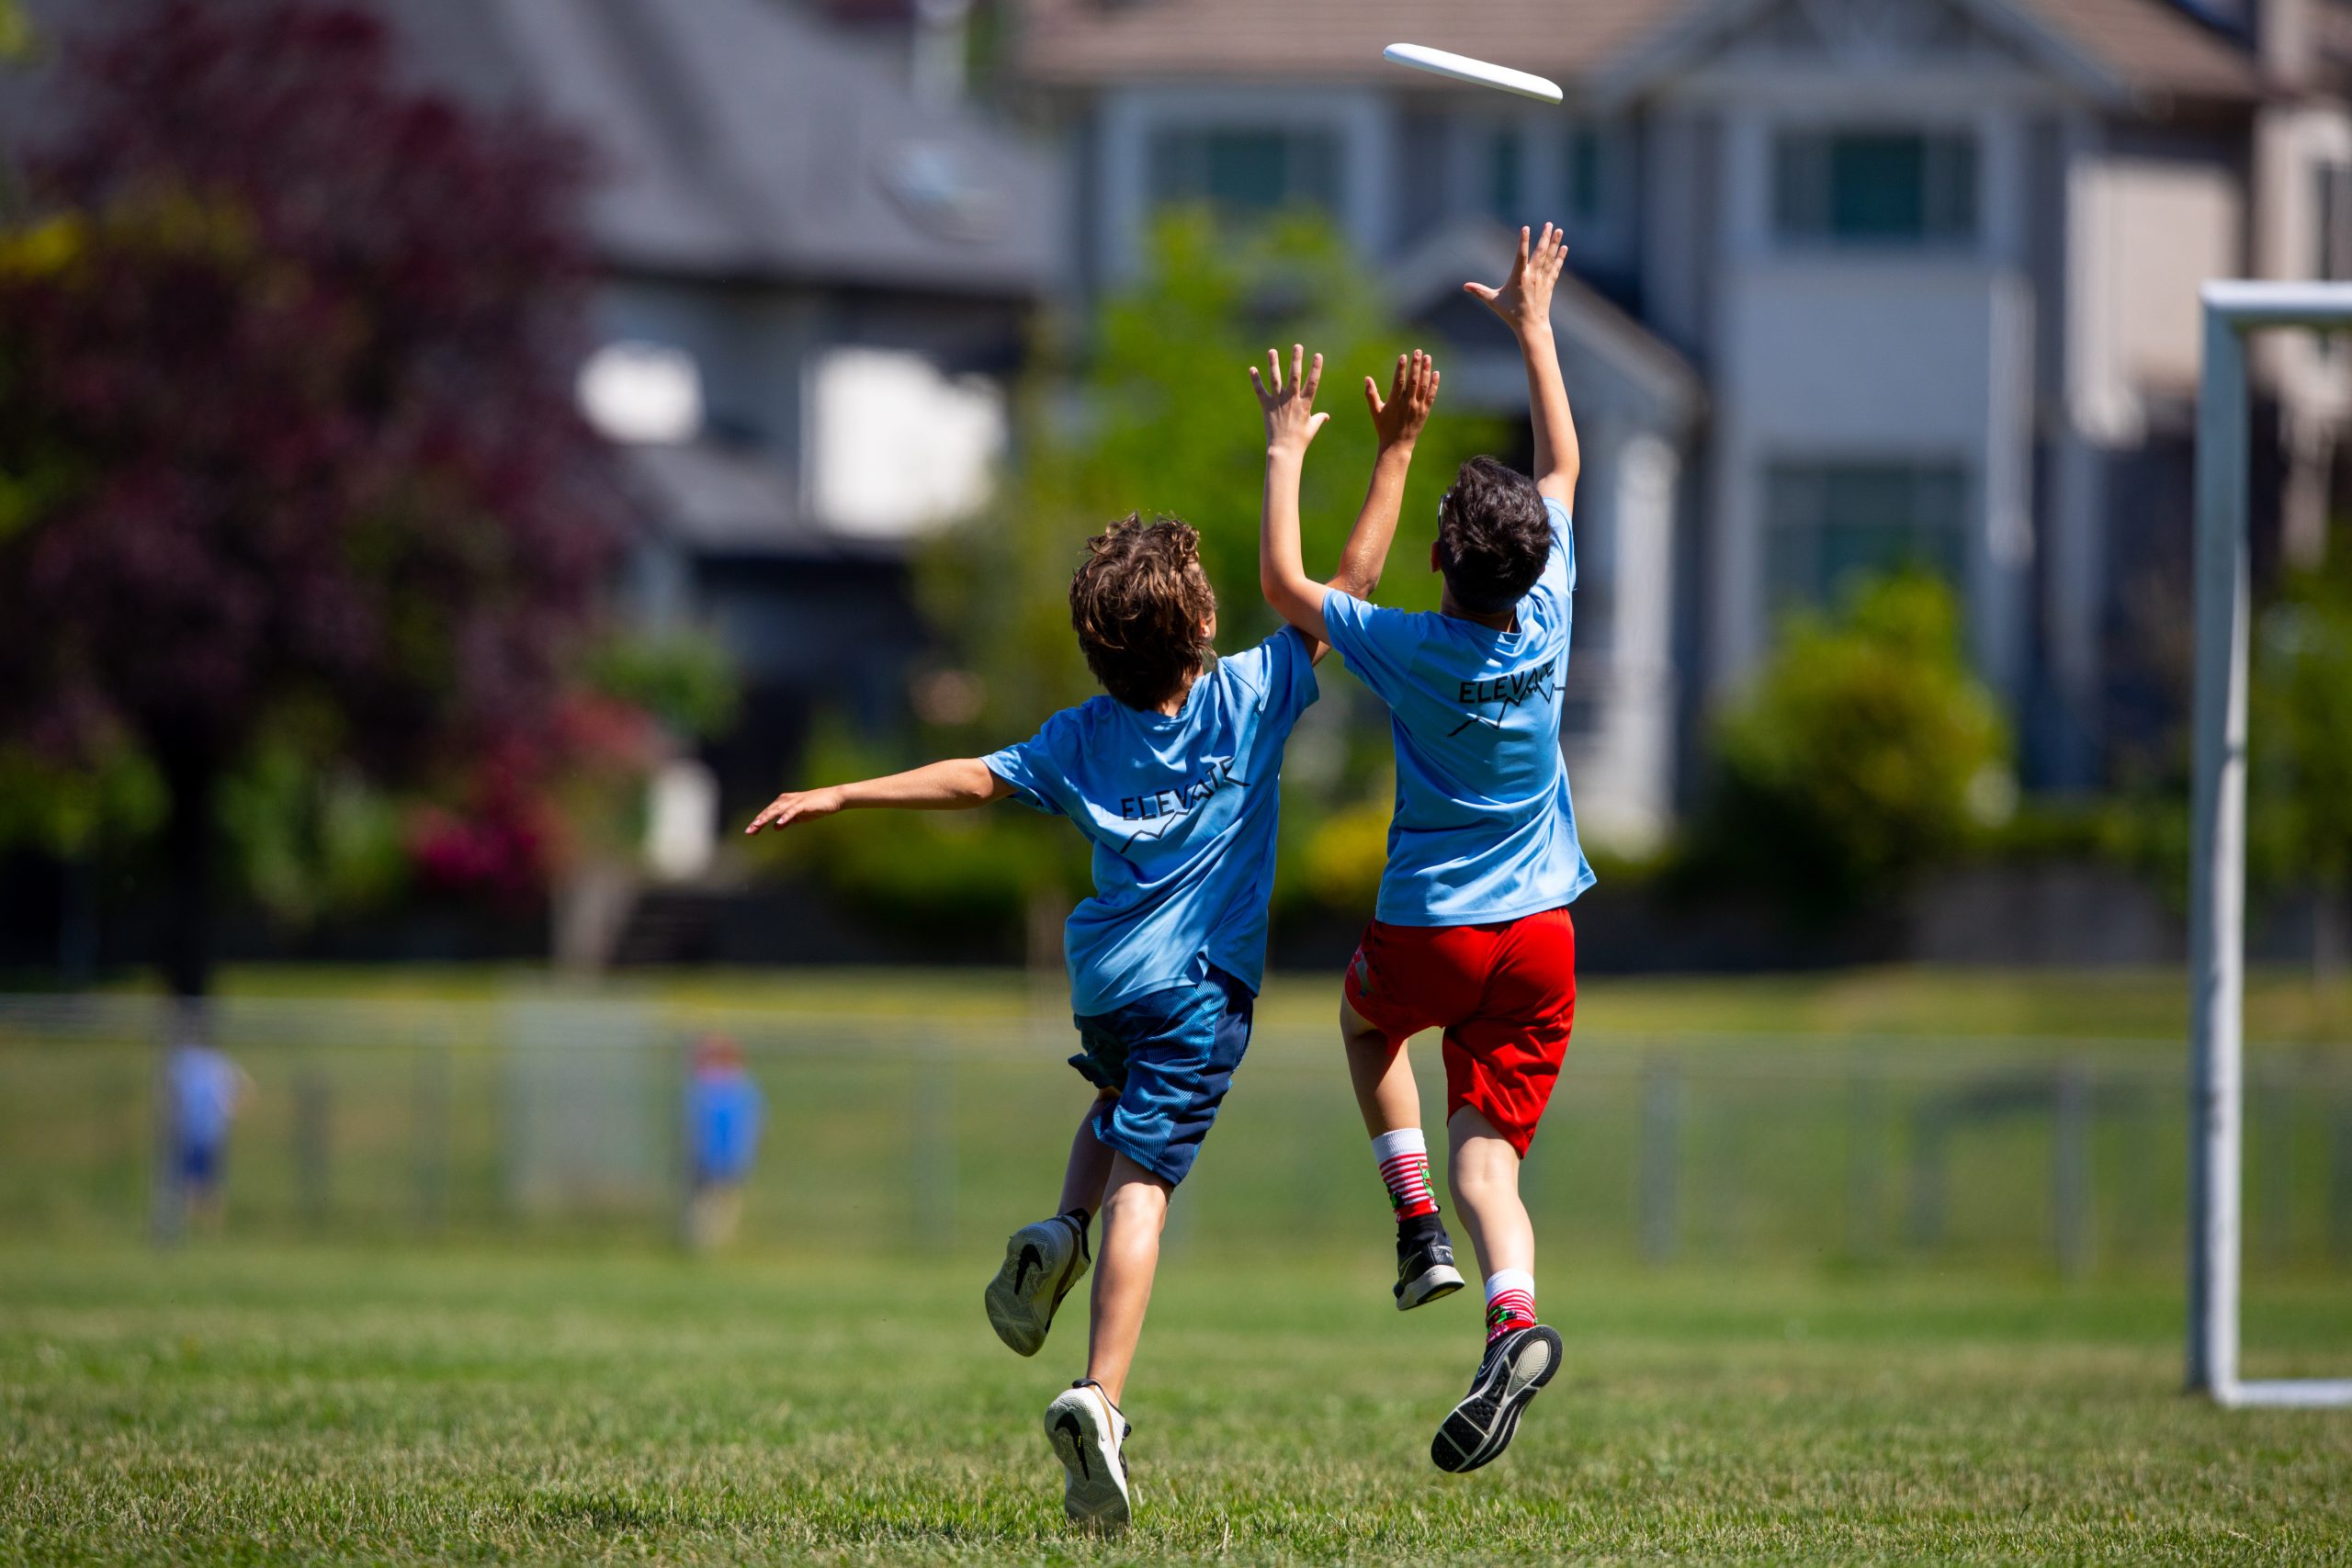 The Benefits of Outdoor Play for Kids | Frisbee Program For Kids